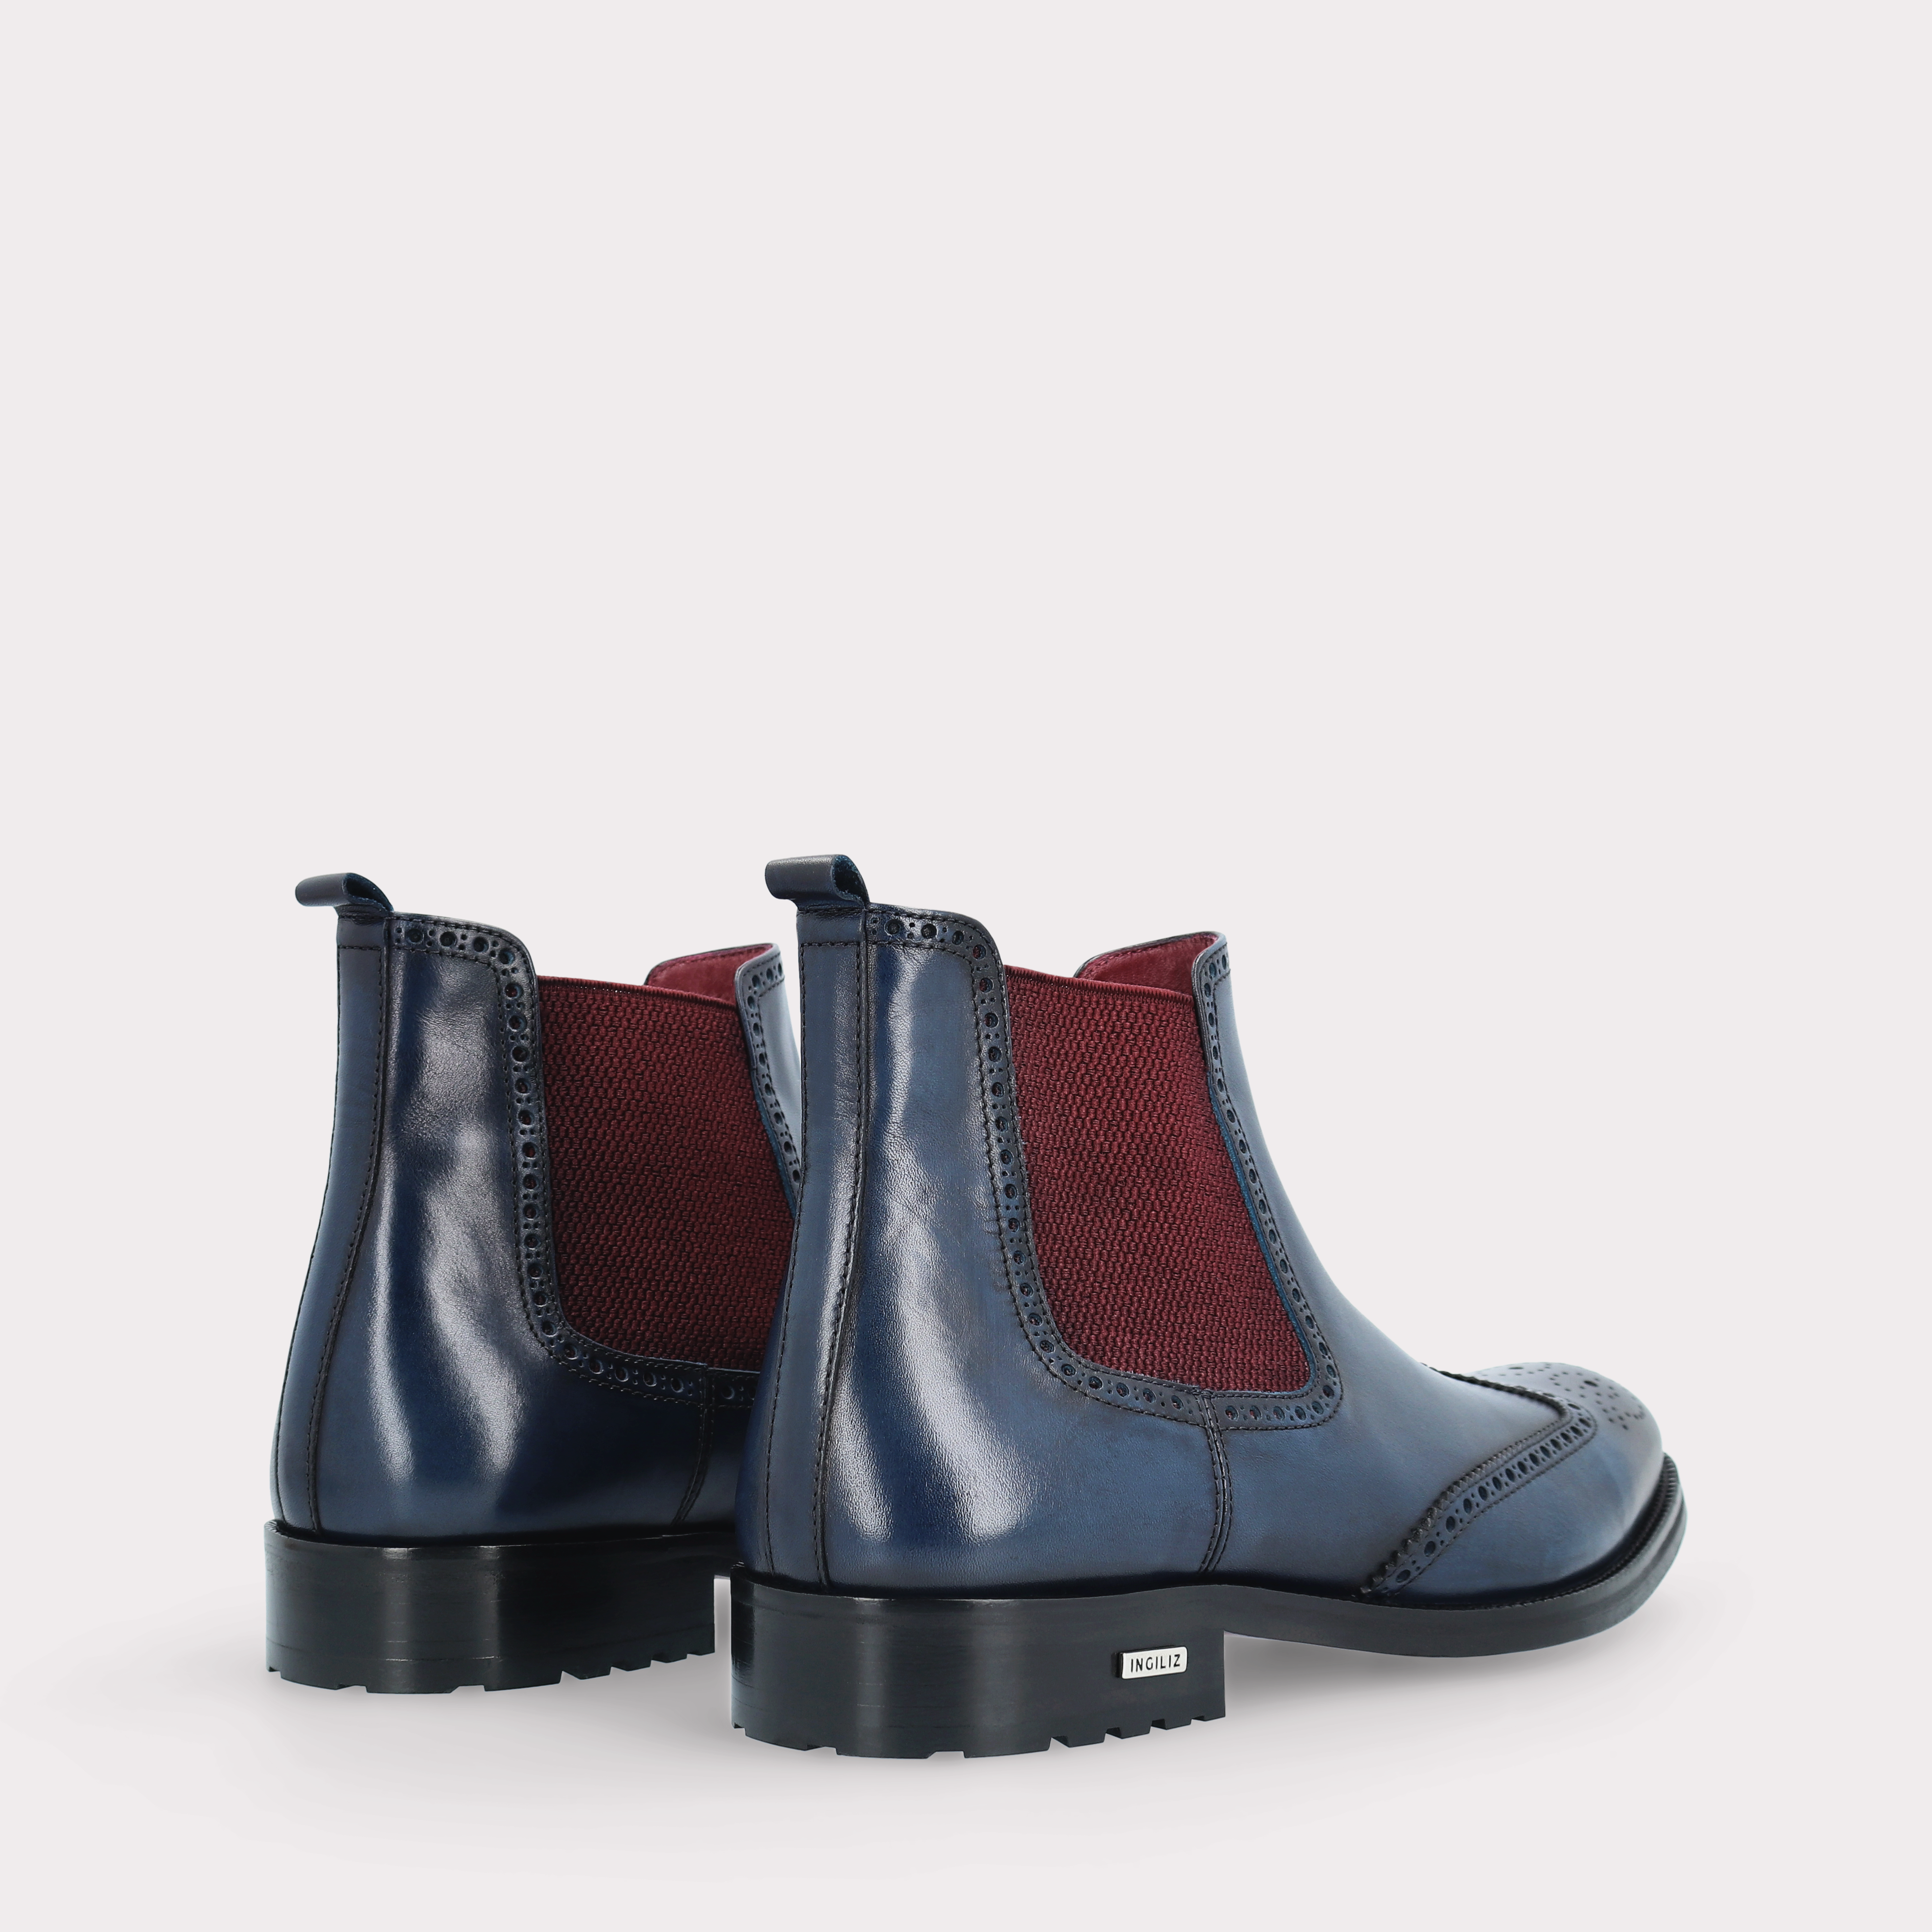 MODENA 01 dark blue leather chelsea boots with bordeaux elastic